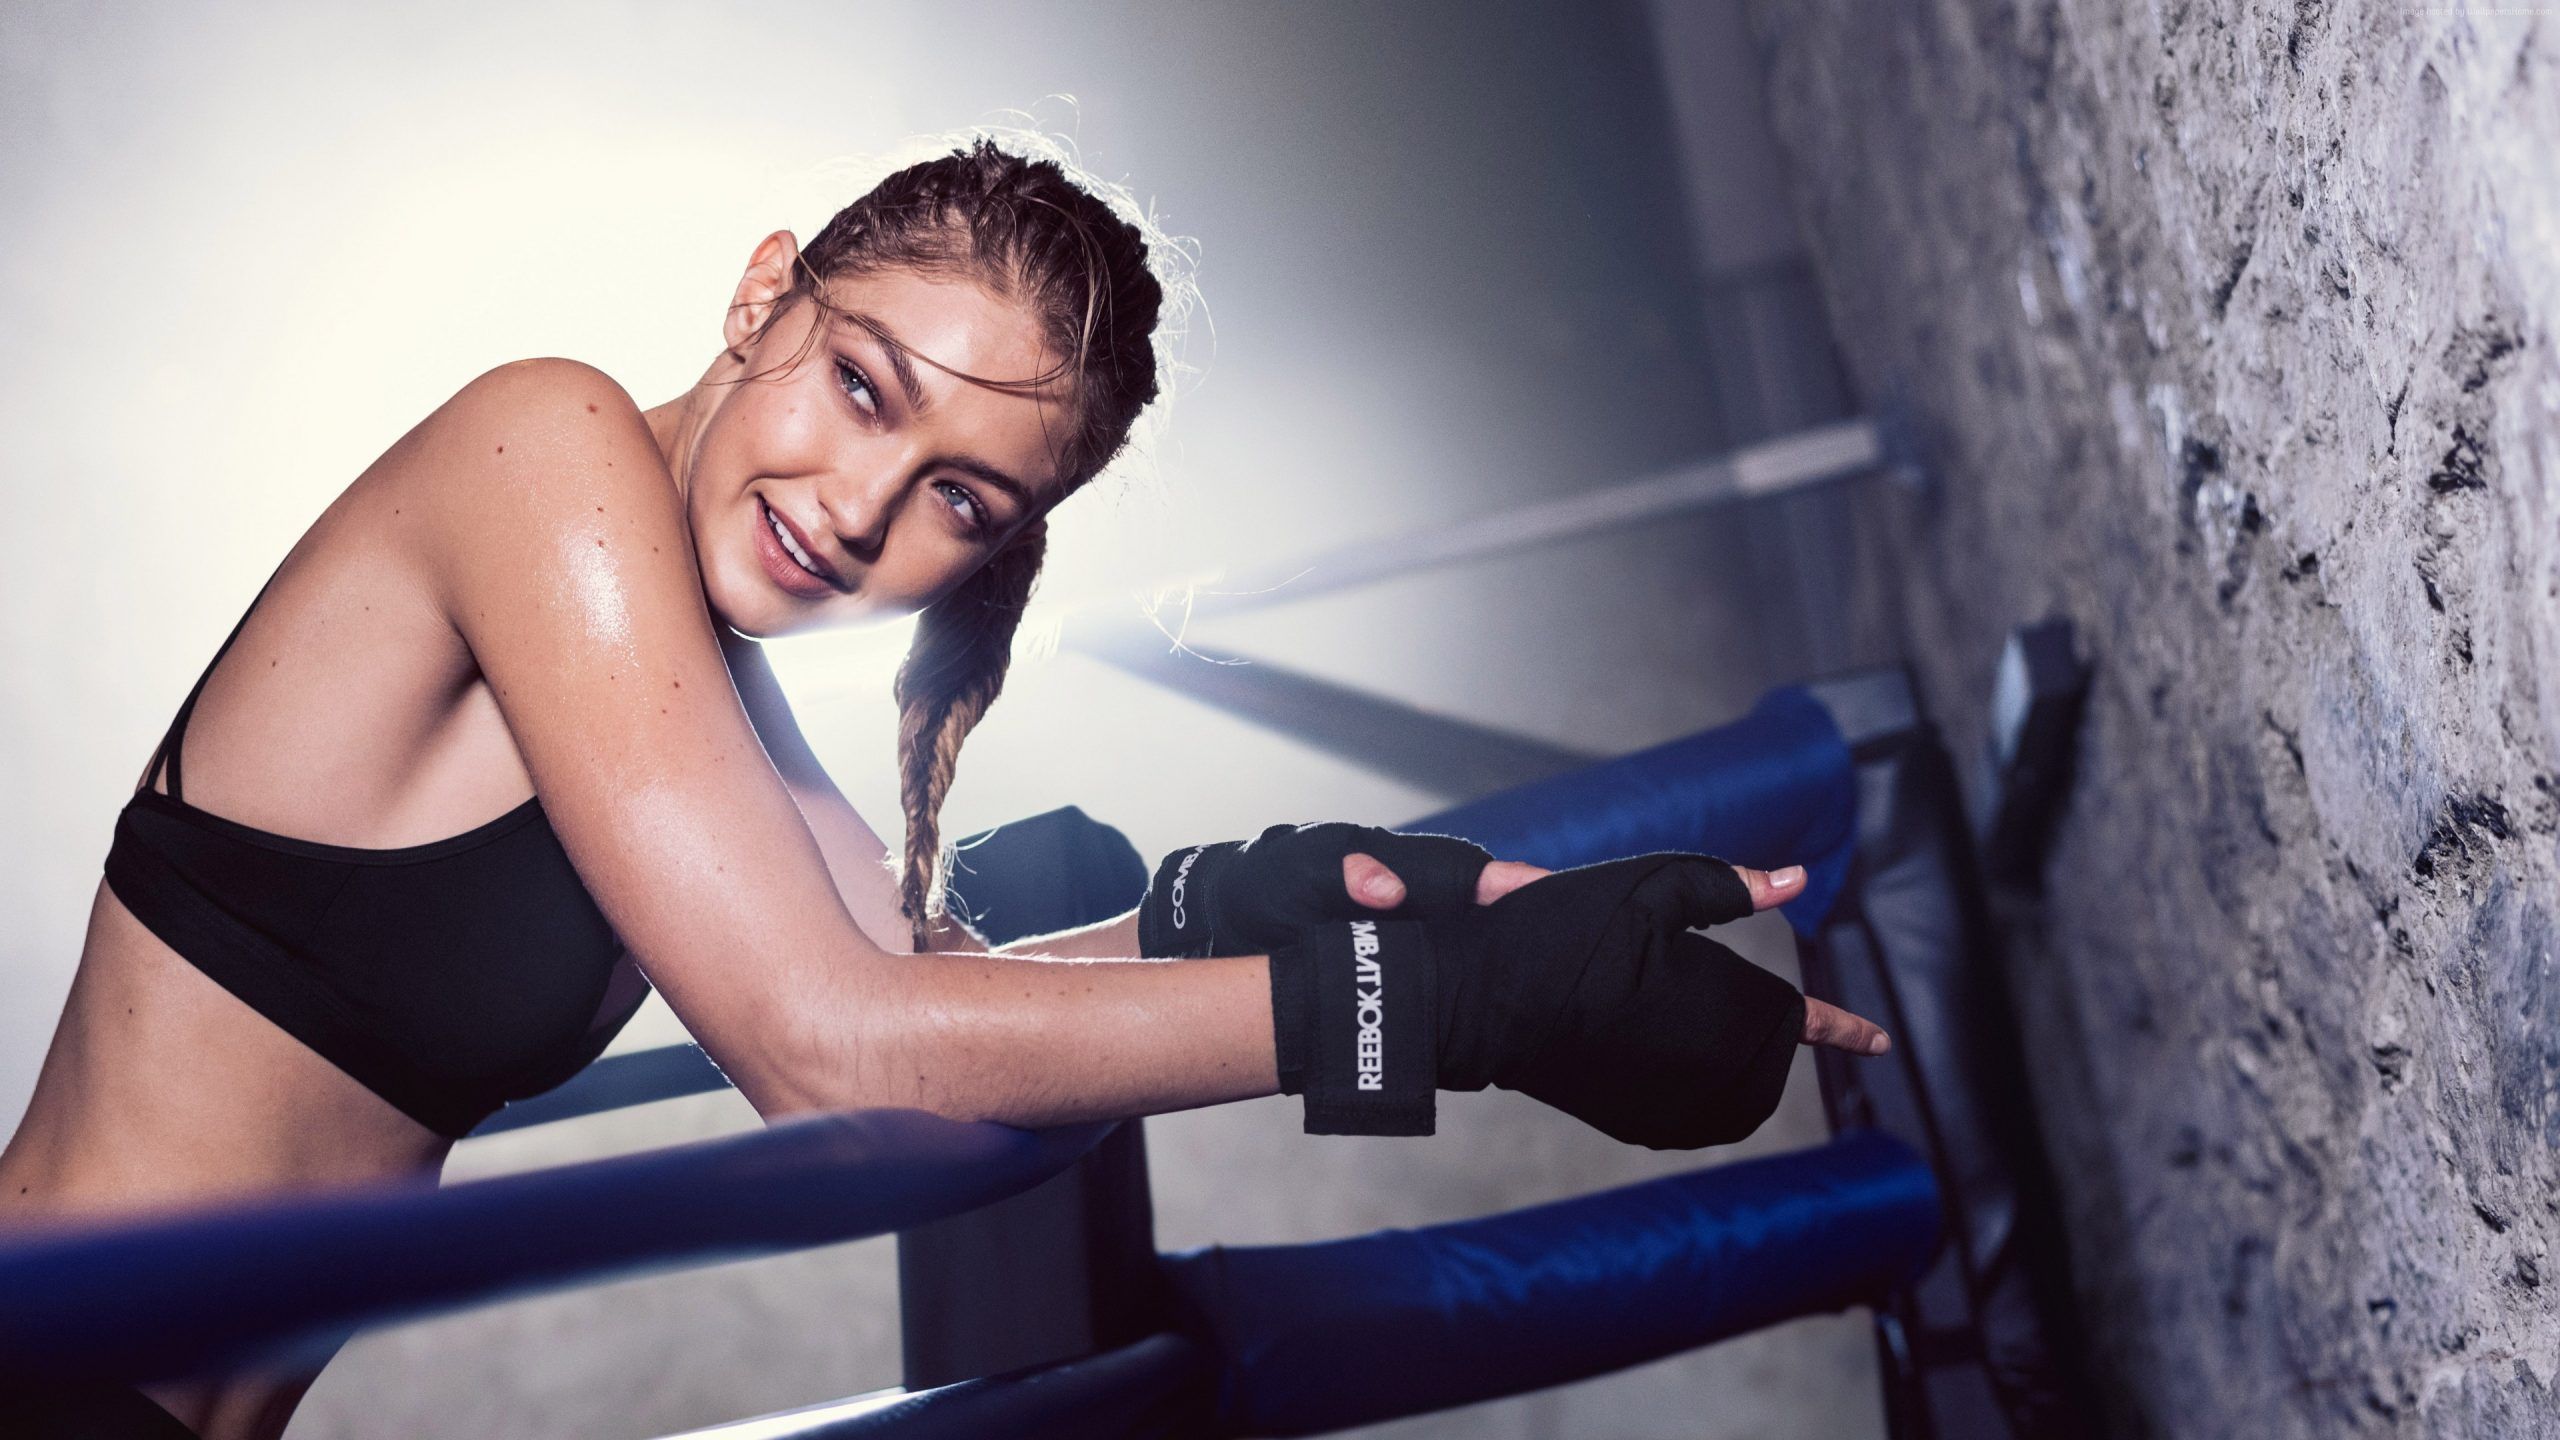 Gigi Hadid Working Out Wallpaper Background 62774 2560x1440px